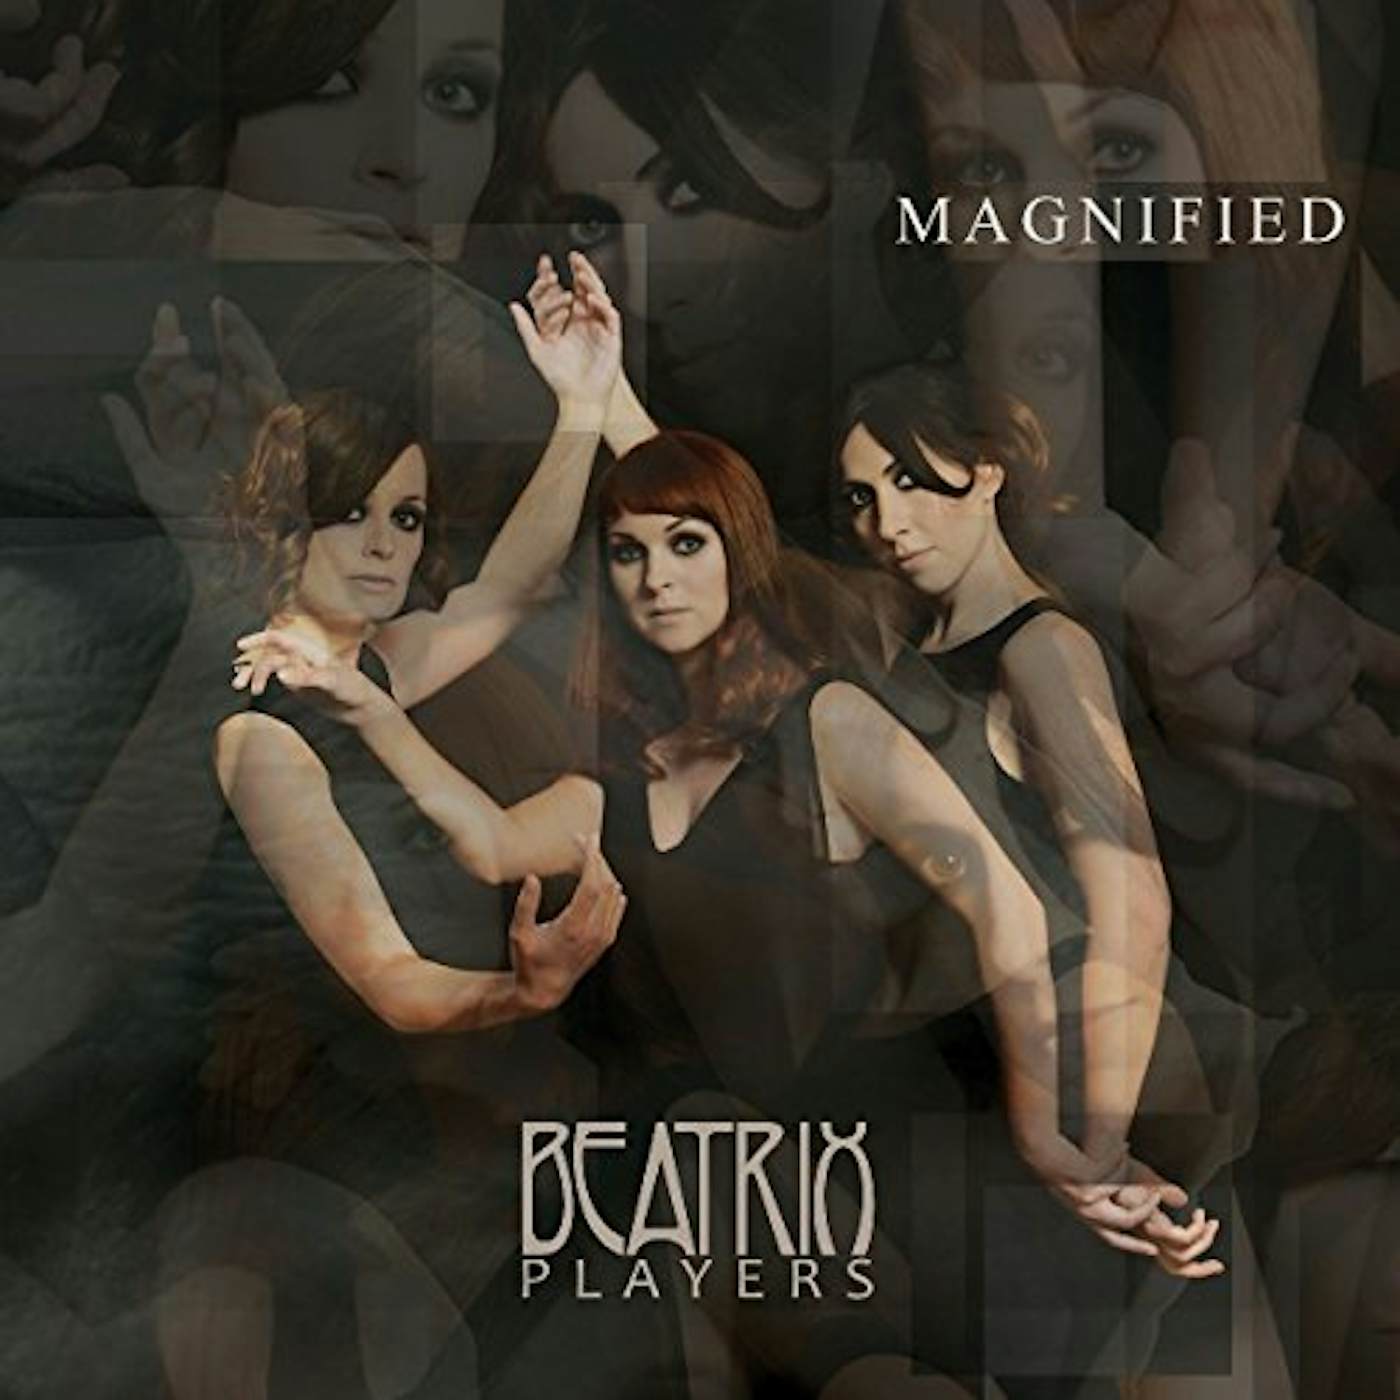 Beatrix Players MAGNIFIED CD